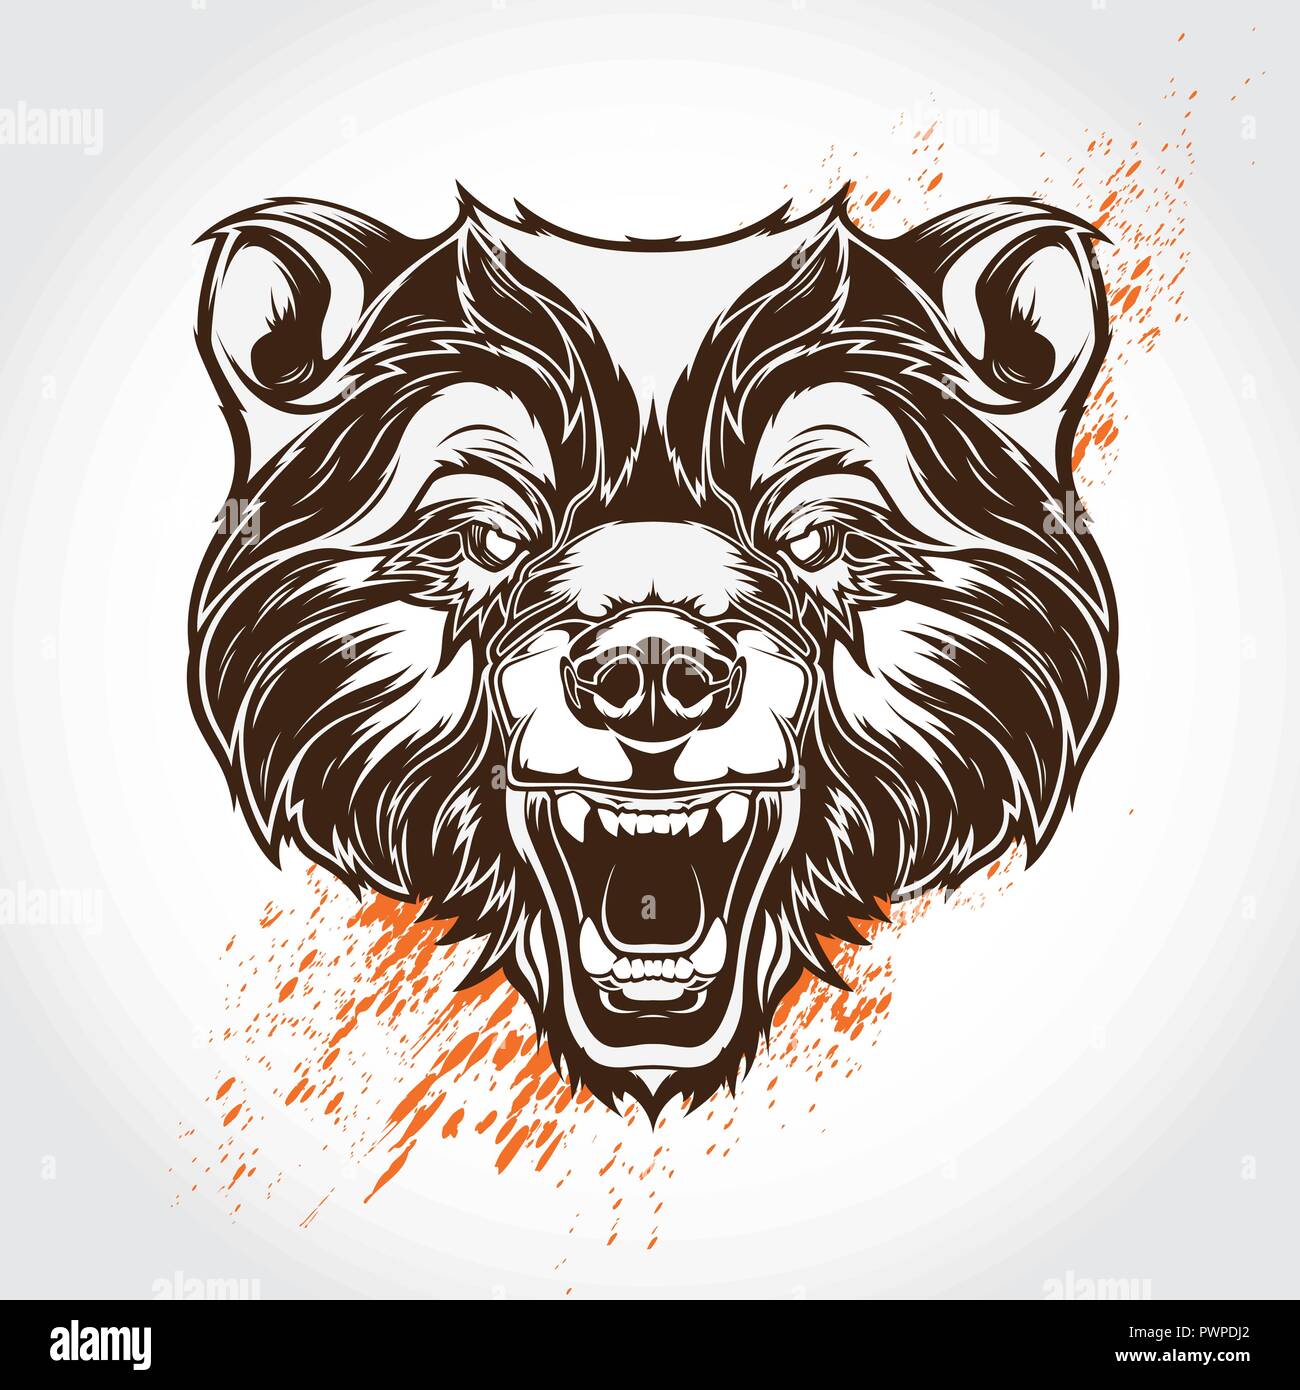 Tattoo art animal bear cat and fox hand drawing and sketch black and white  | Stock vector | Colourbox